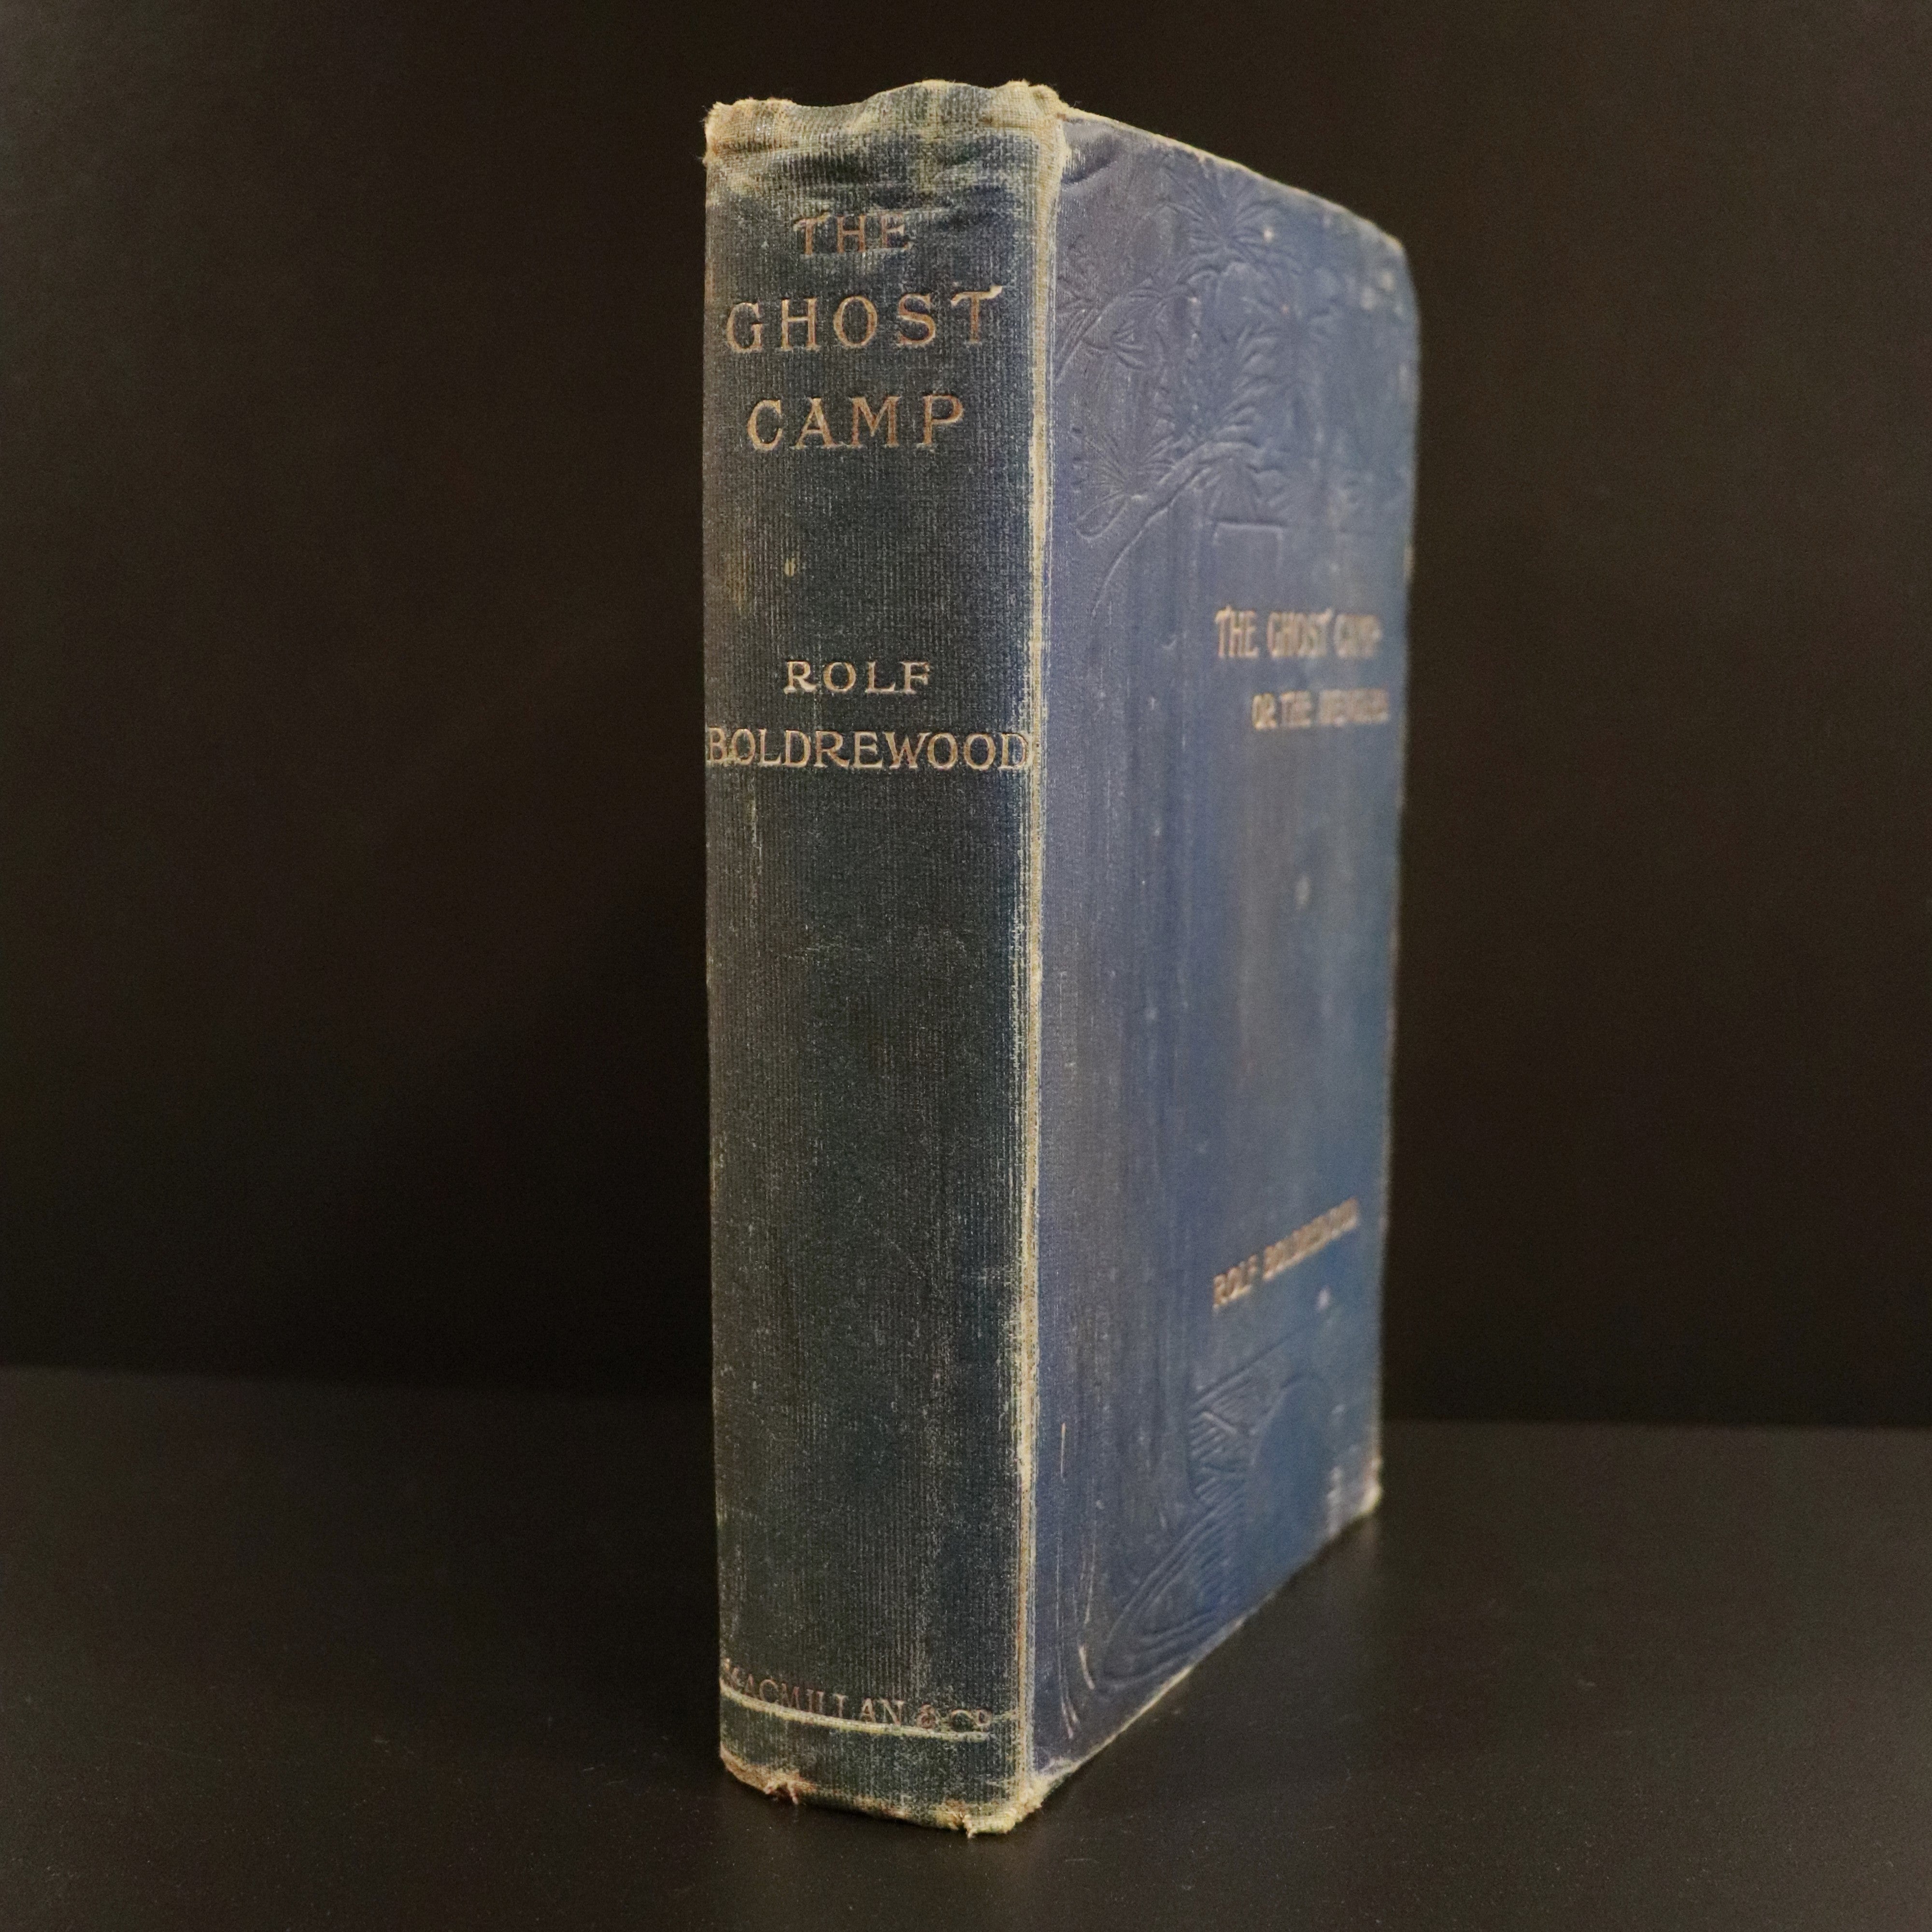 1902 The Ghost Camp by Rolf Boldrewood 1st Ed. Antique Australian Fiction Book